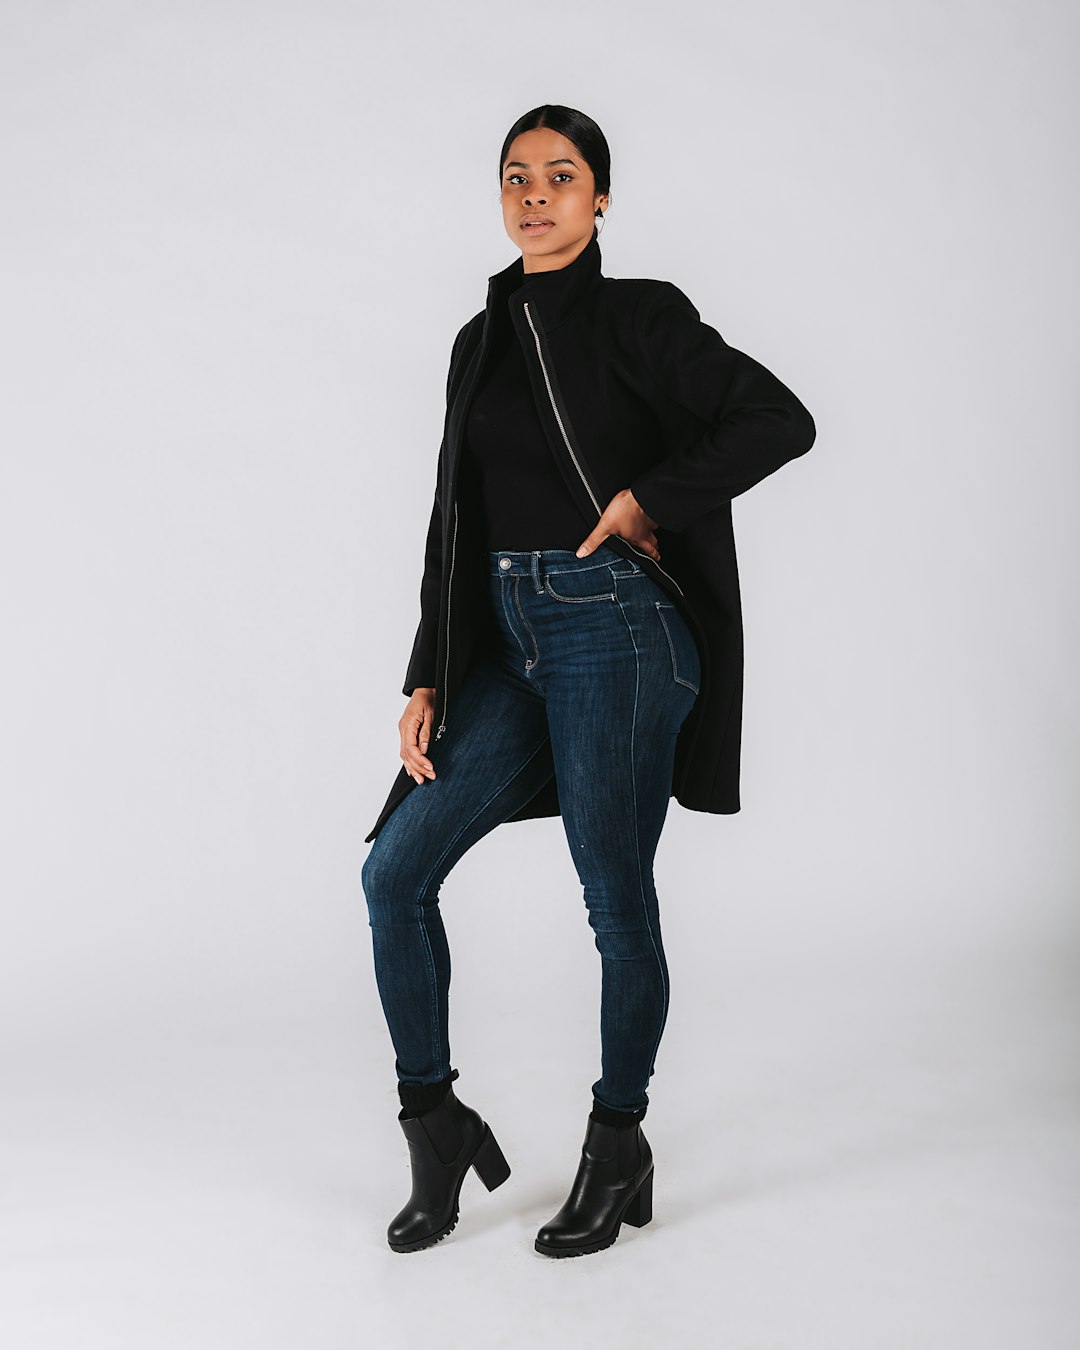 woman in black jacket and blue denim jeans